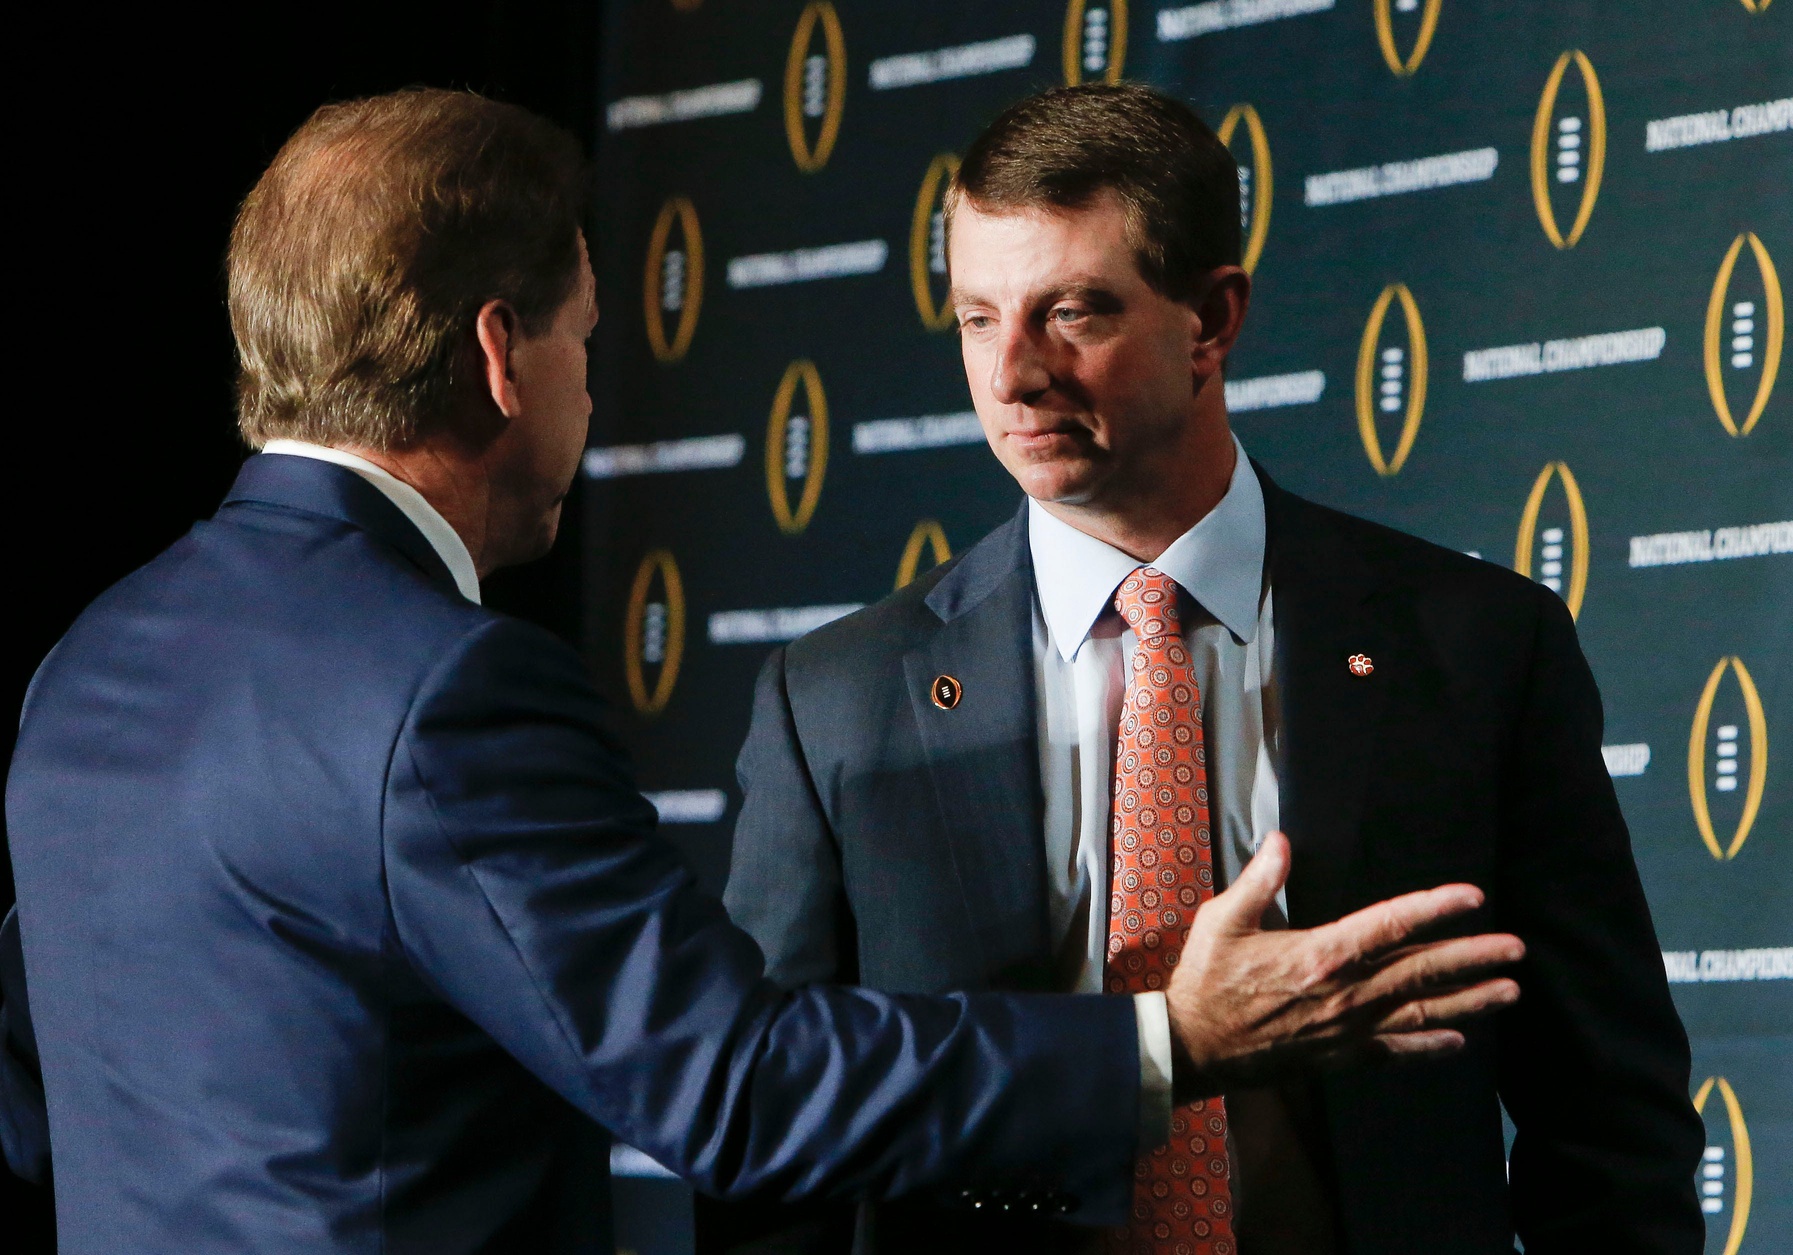 After a little bit of speculation that Dabo Swinney could leave Clemson for Alabama, he will be staying. What does this mean for Clemson?